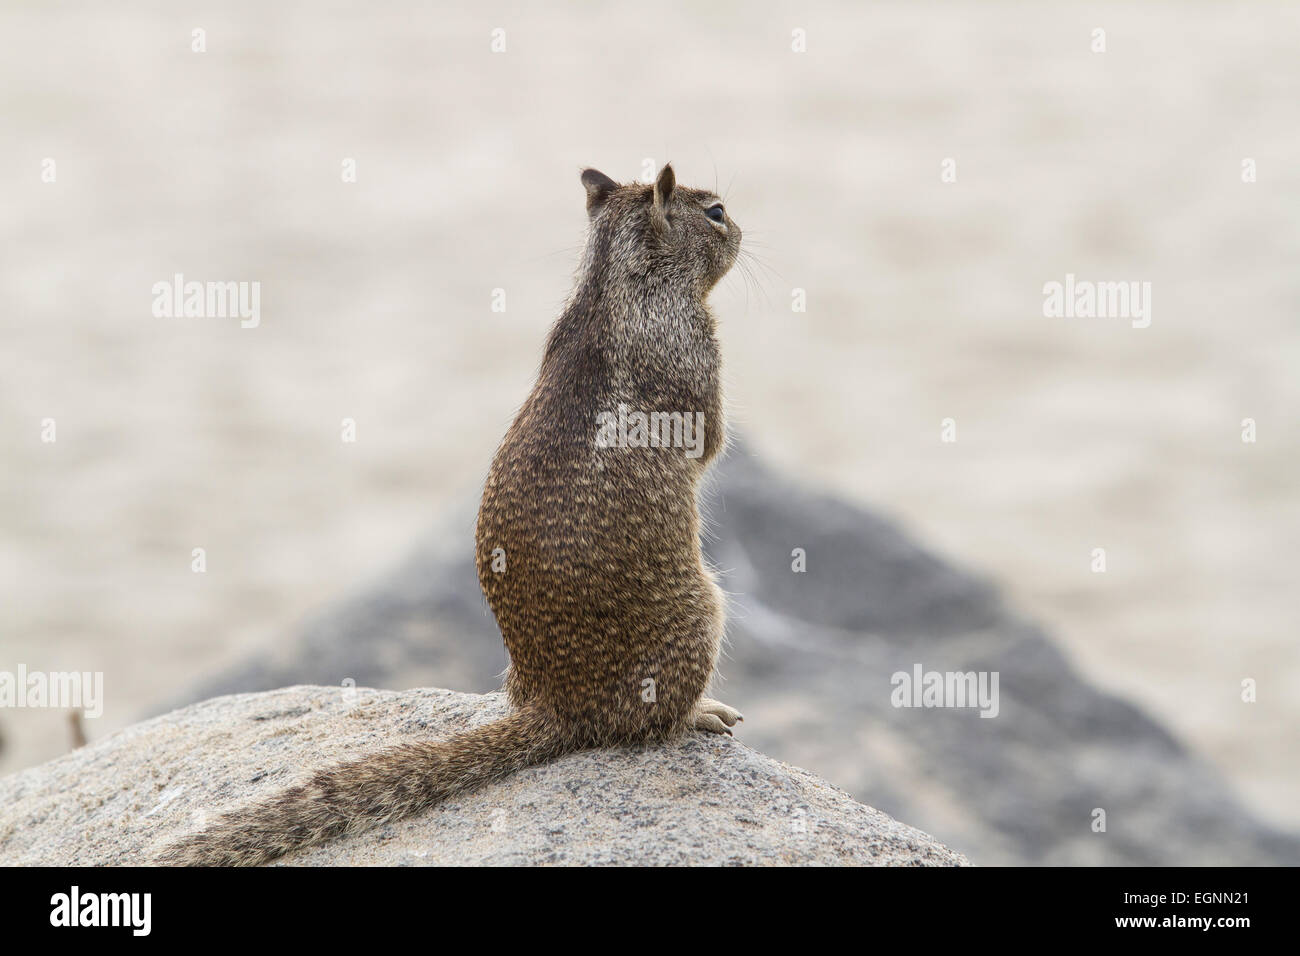 Coastal squirrel watching people and dogs as they walk by Stock Photo